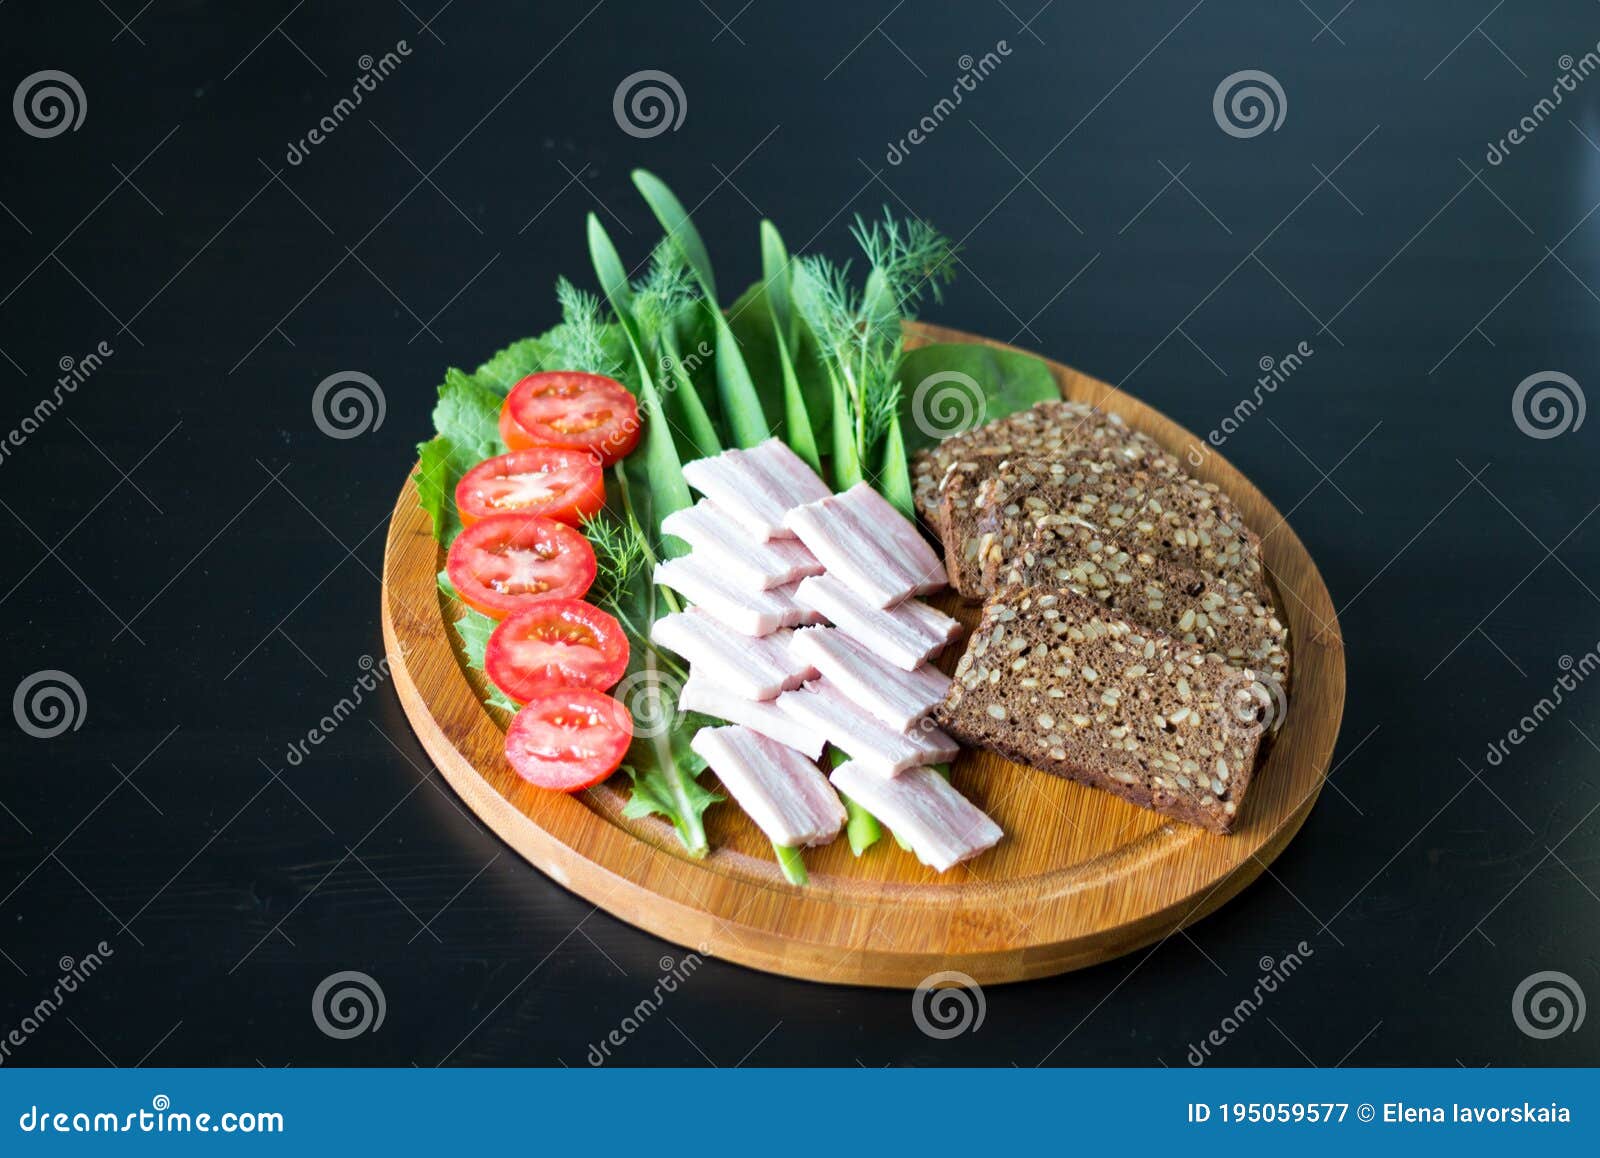 on a round wooden board is sliced black bread with seeds, smoked brisket, green onions, lettuce, tomatoes and dill. black